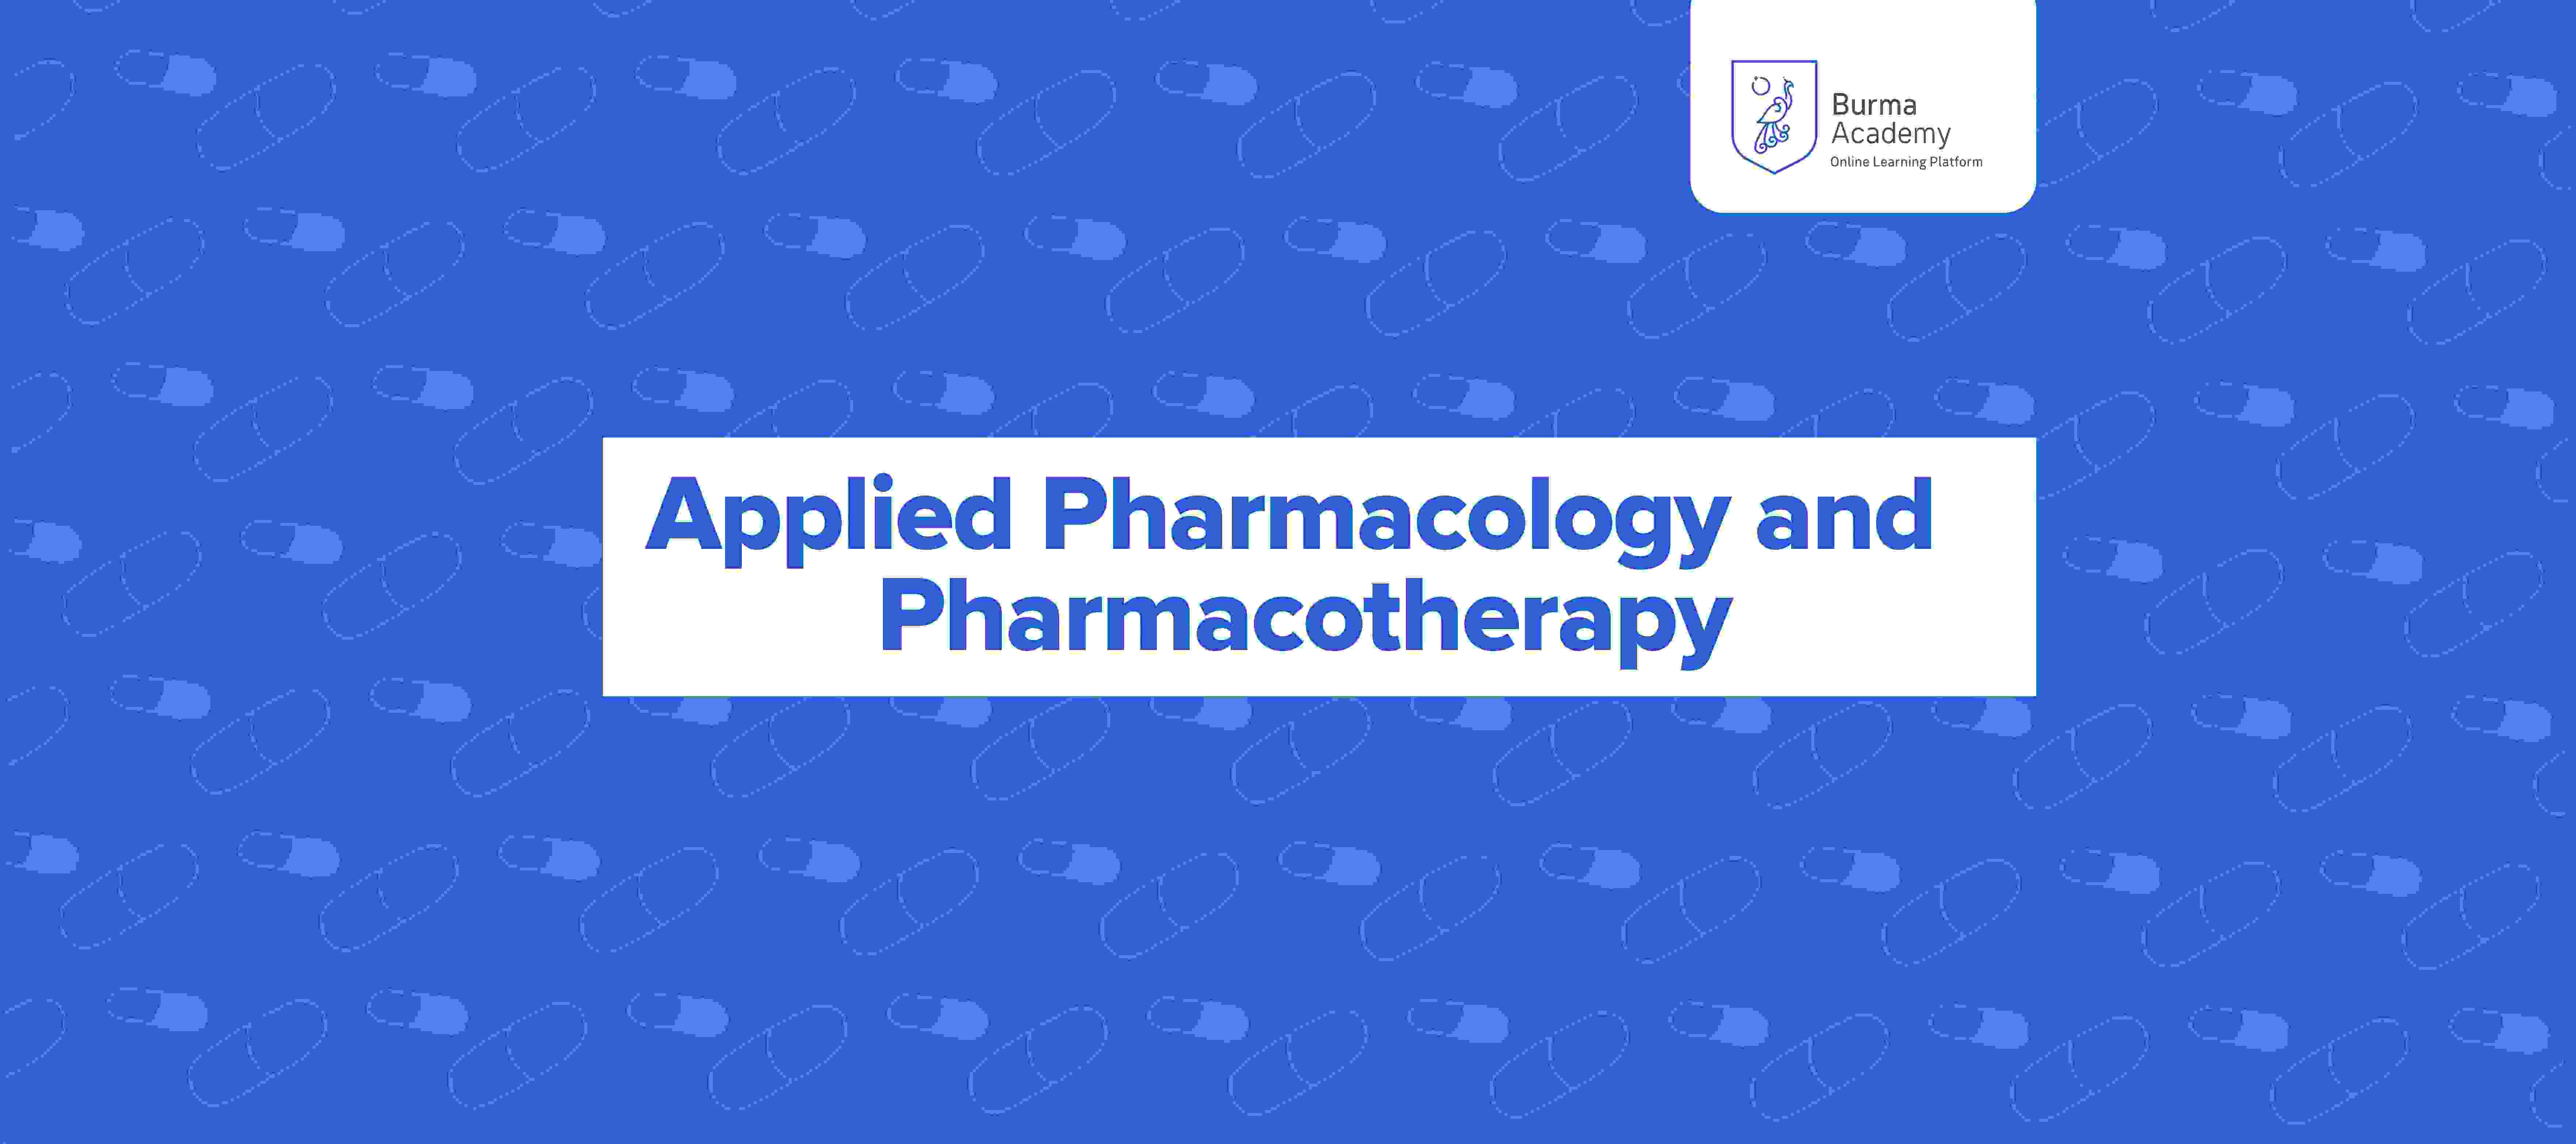 Applied Pharmacology and Pharmacotherapy BA012